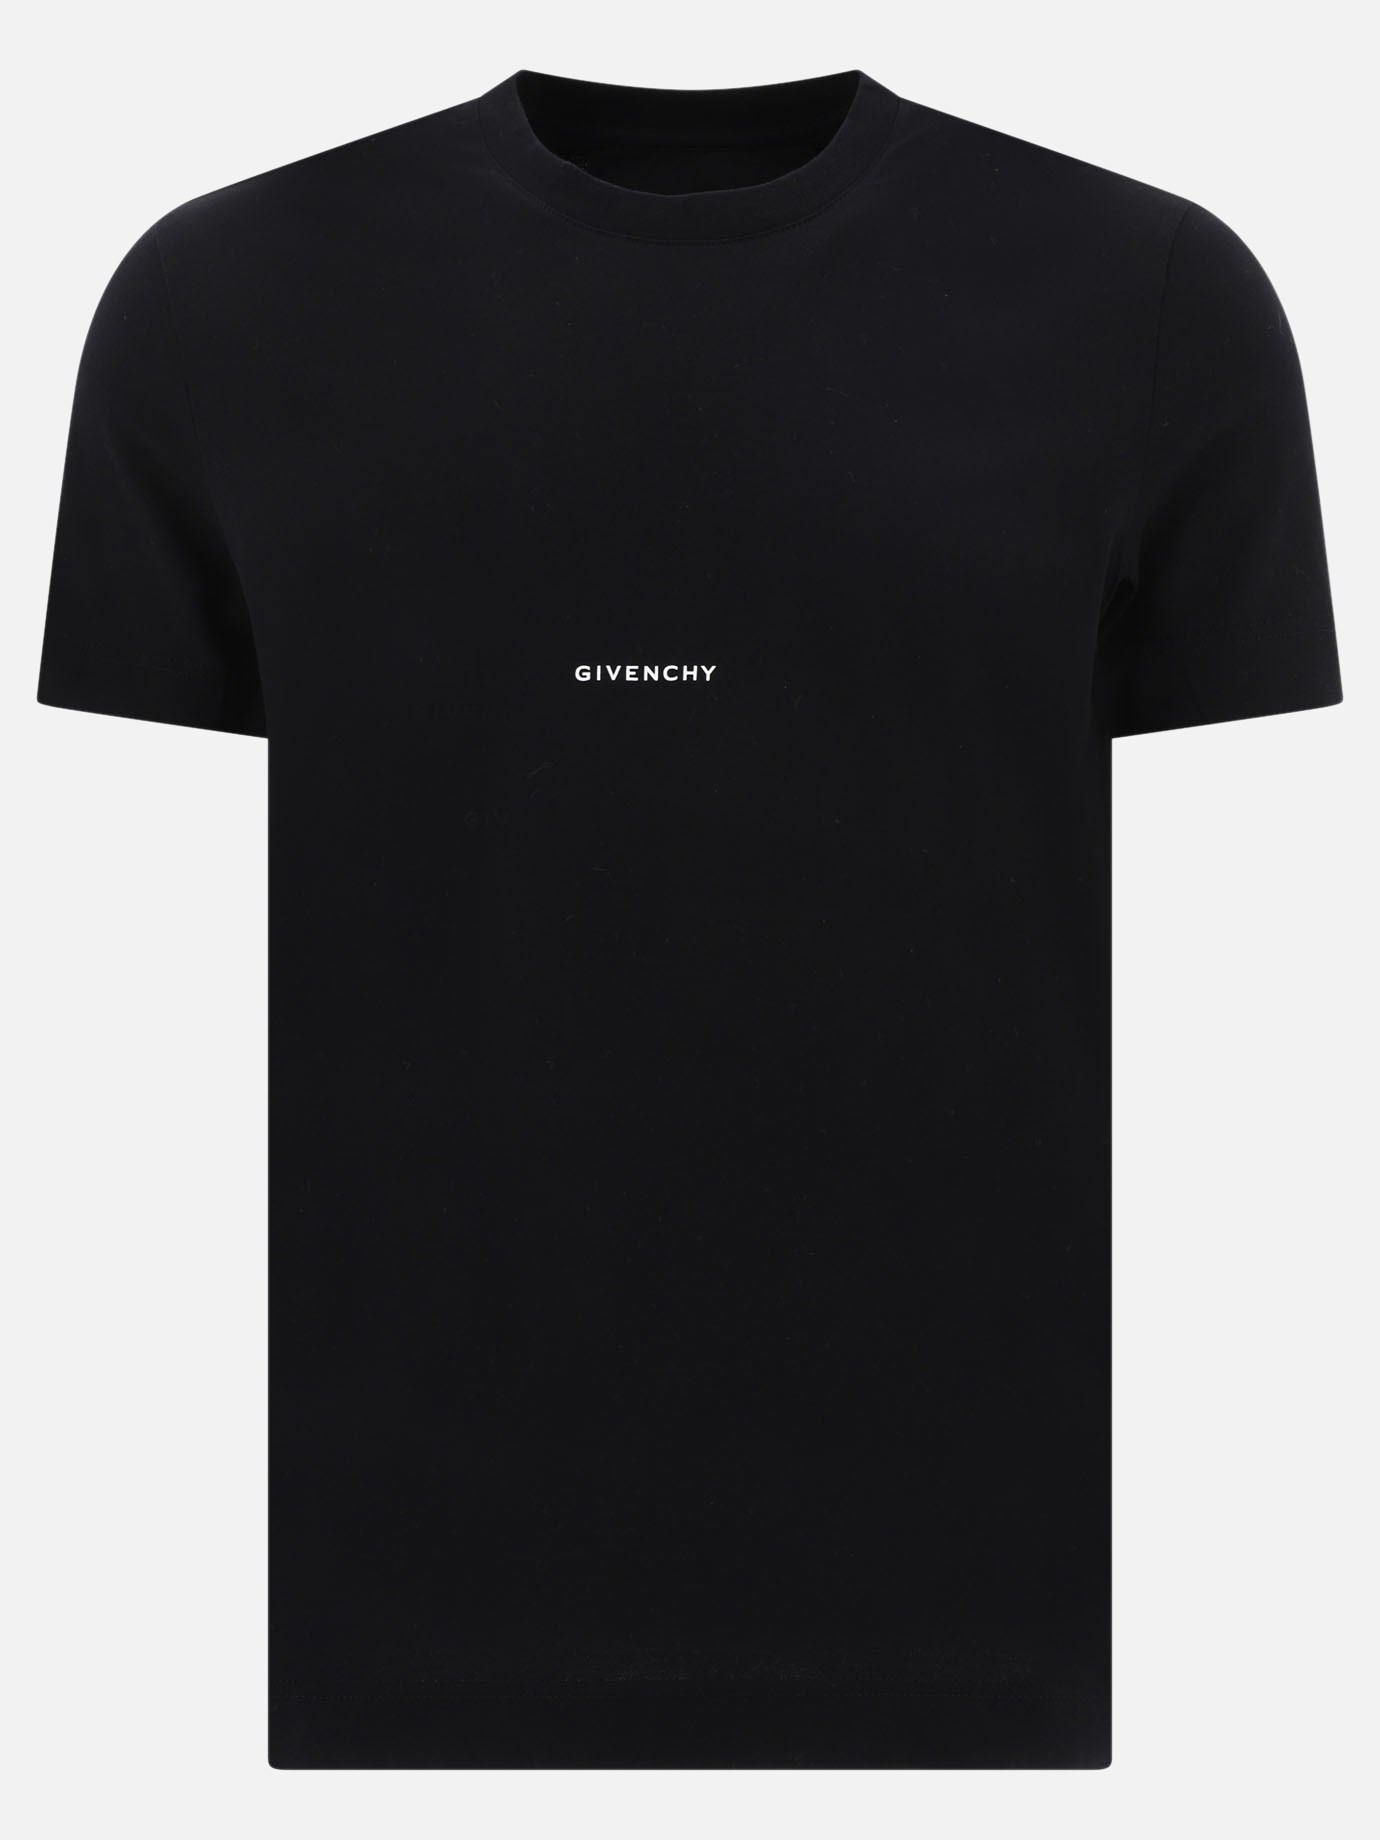 T-shirt  Micro Givenchy by Givenchy - 2